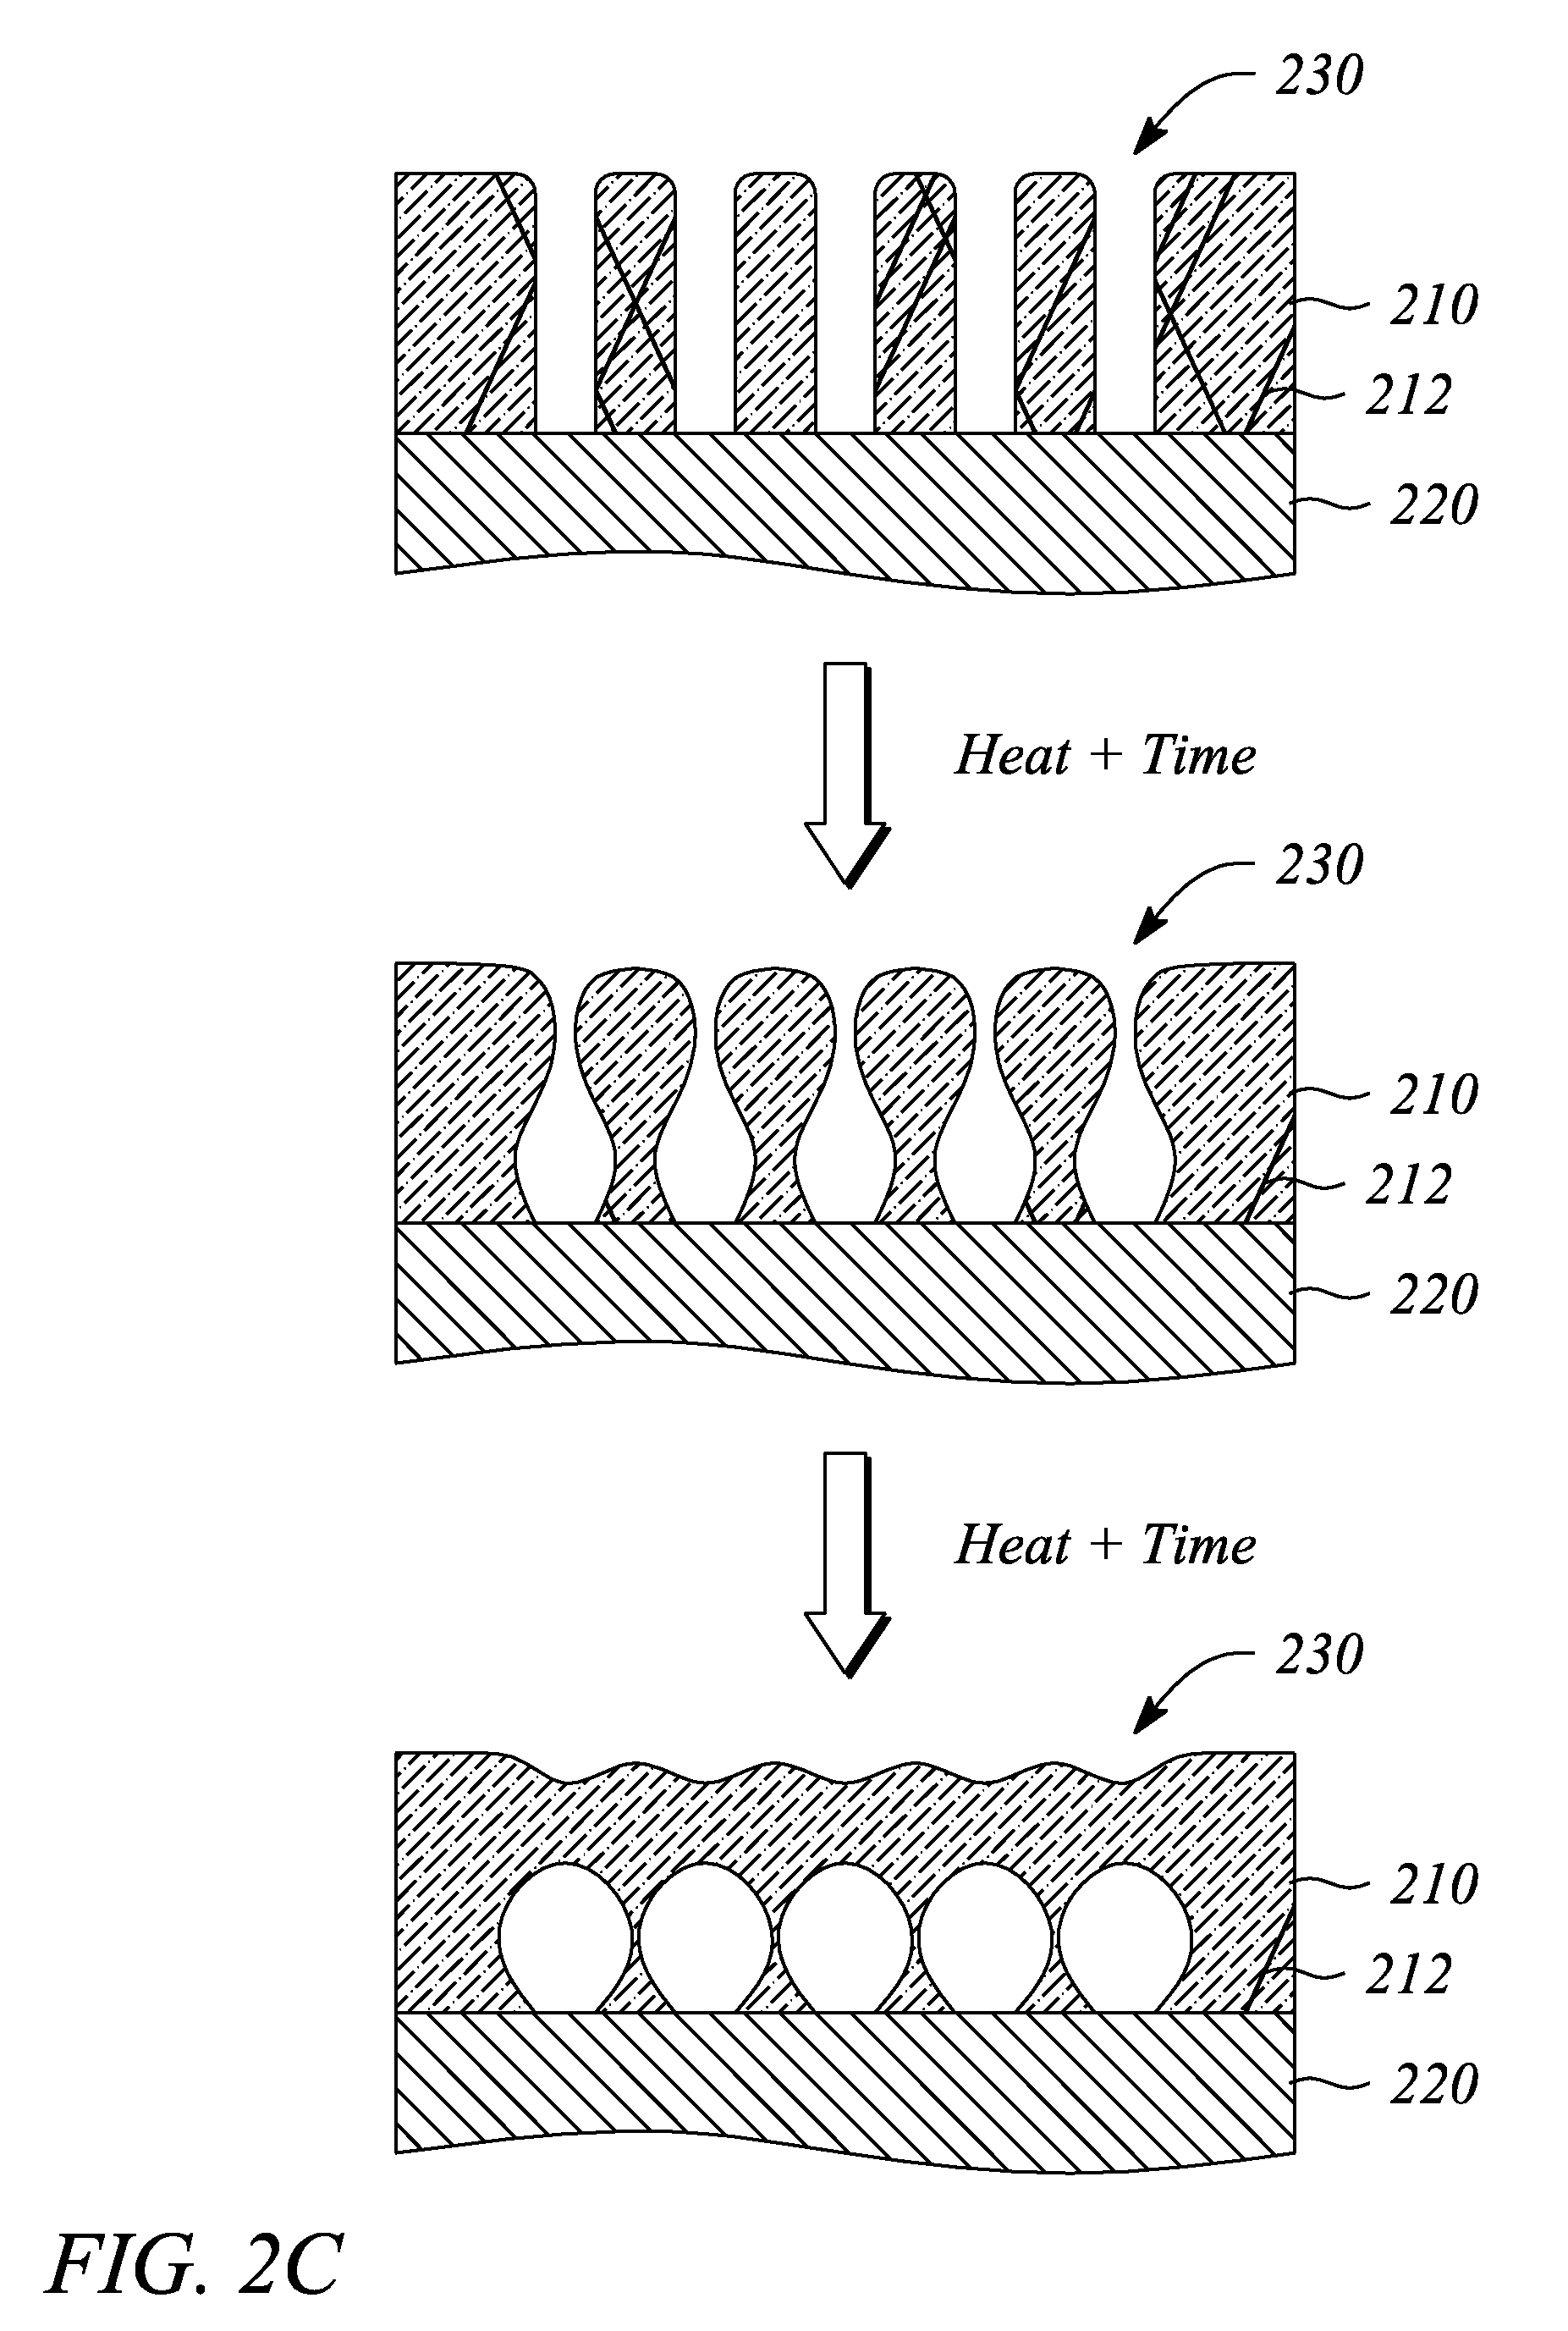 Suspended mono-crystalline structure and method of fabrication from a heteroepitaxial layer